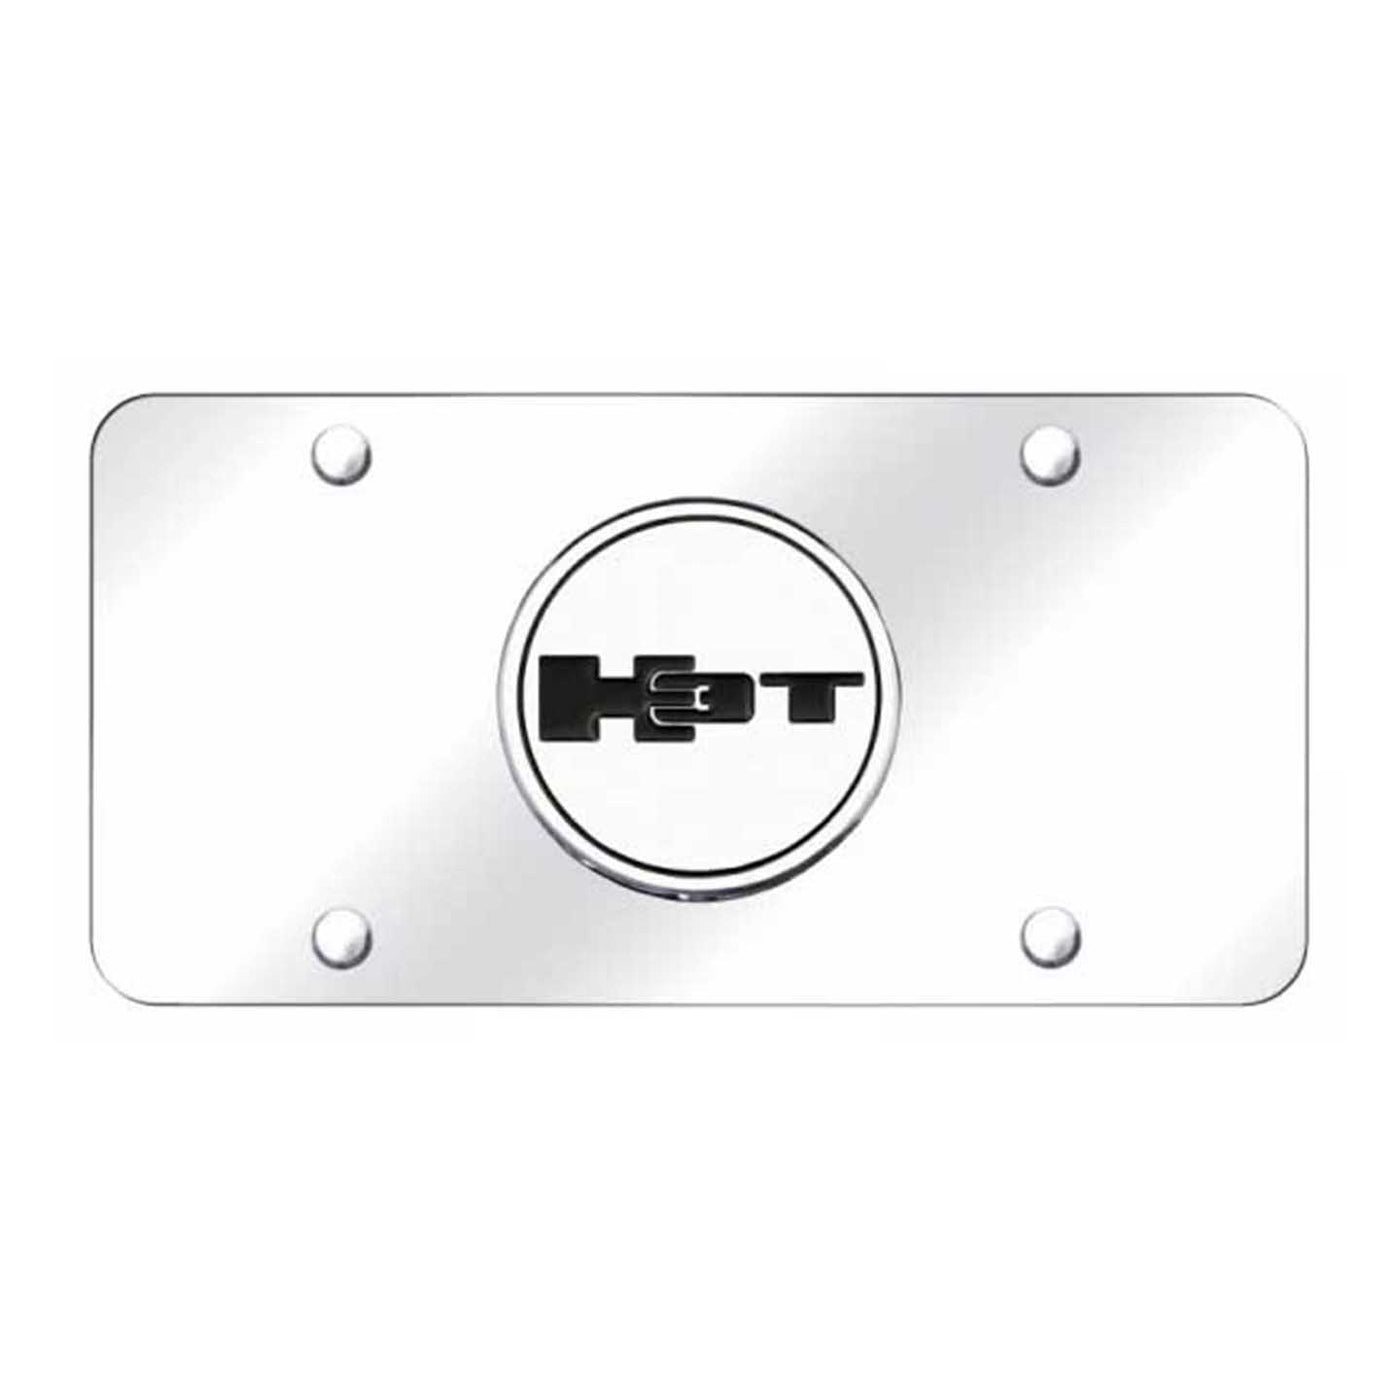 Hummer H3T License Plate - Chrome on Mirrored